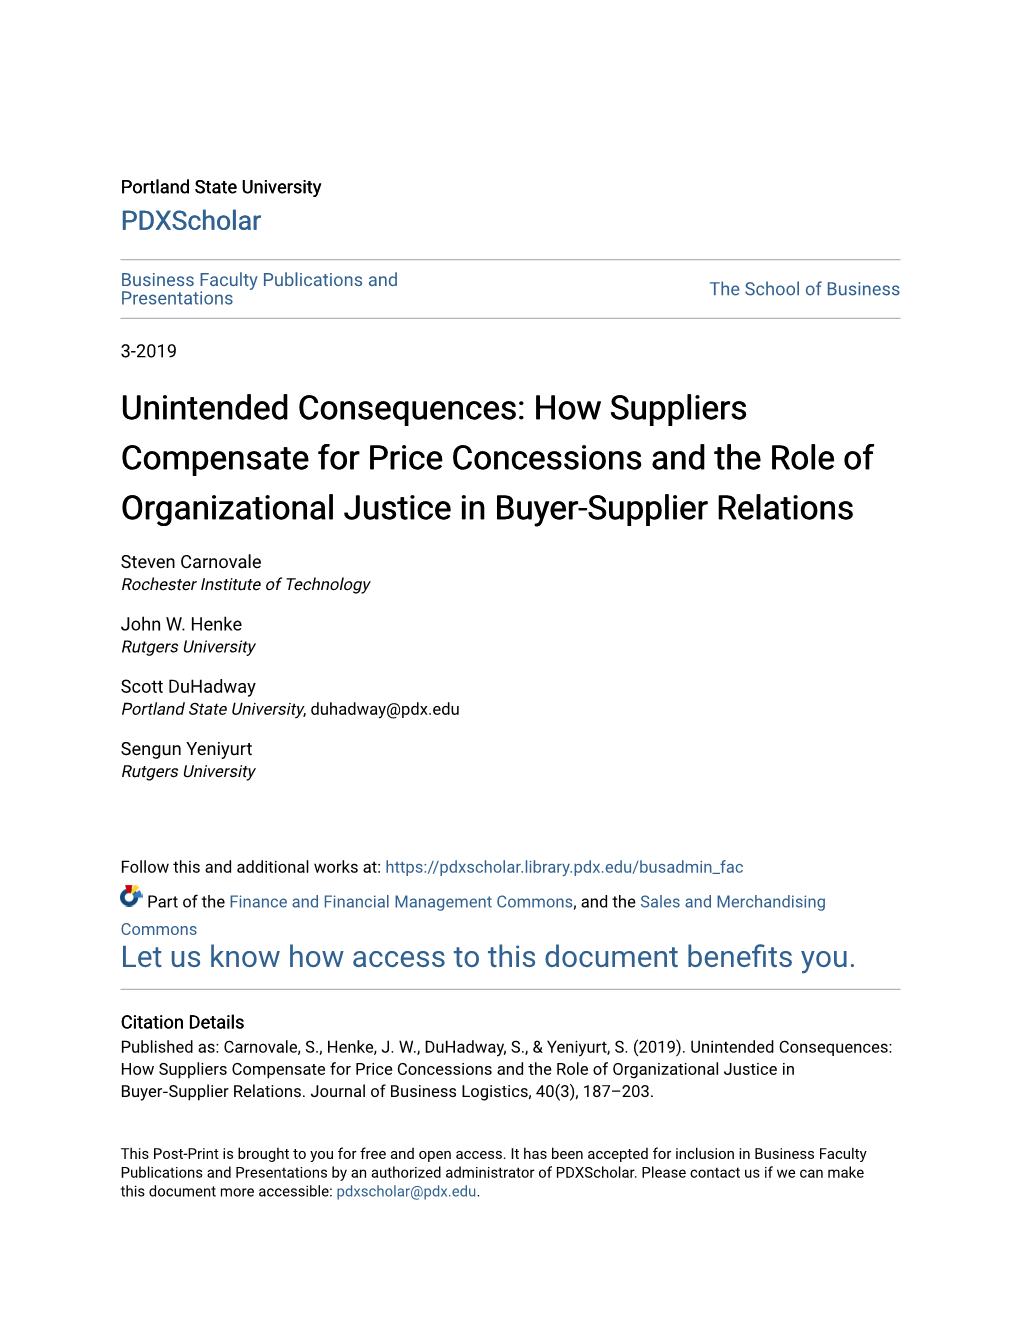 How Suppliers Compensate for Price Concessions and the Role of Organizational Justice in Buyer-Supplier Relations